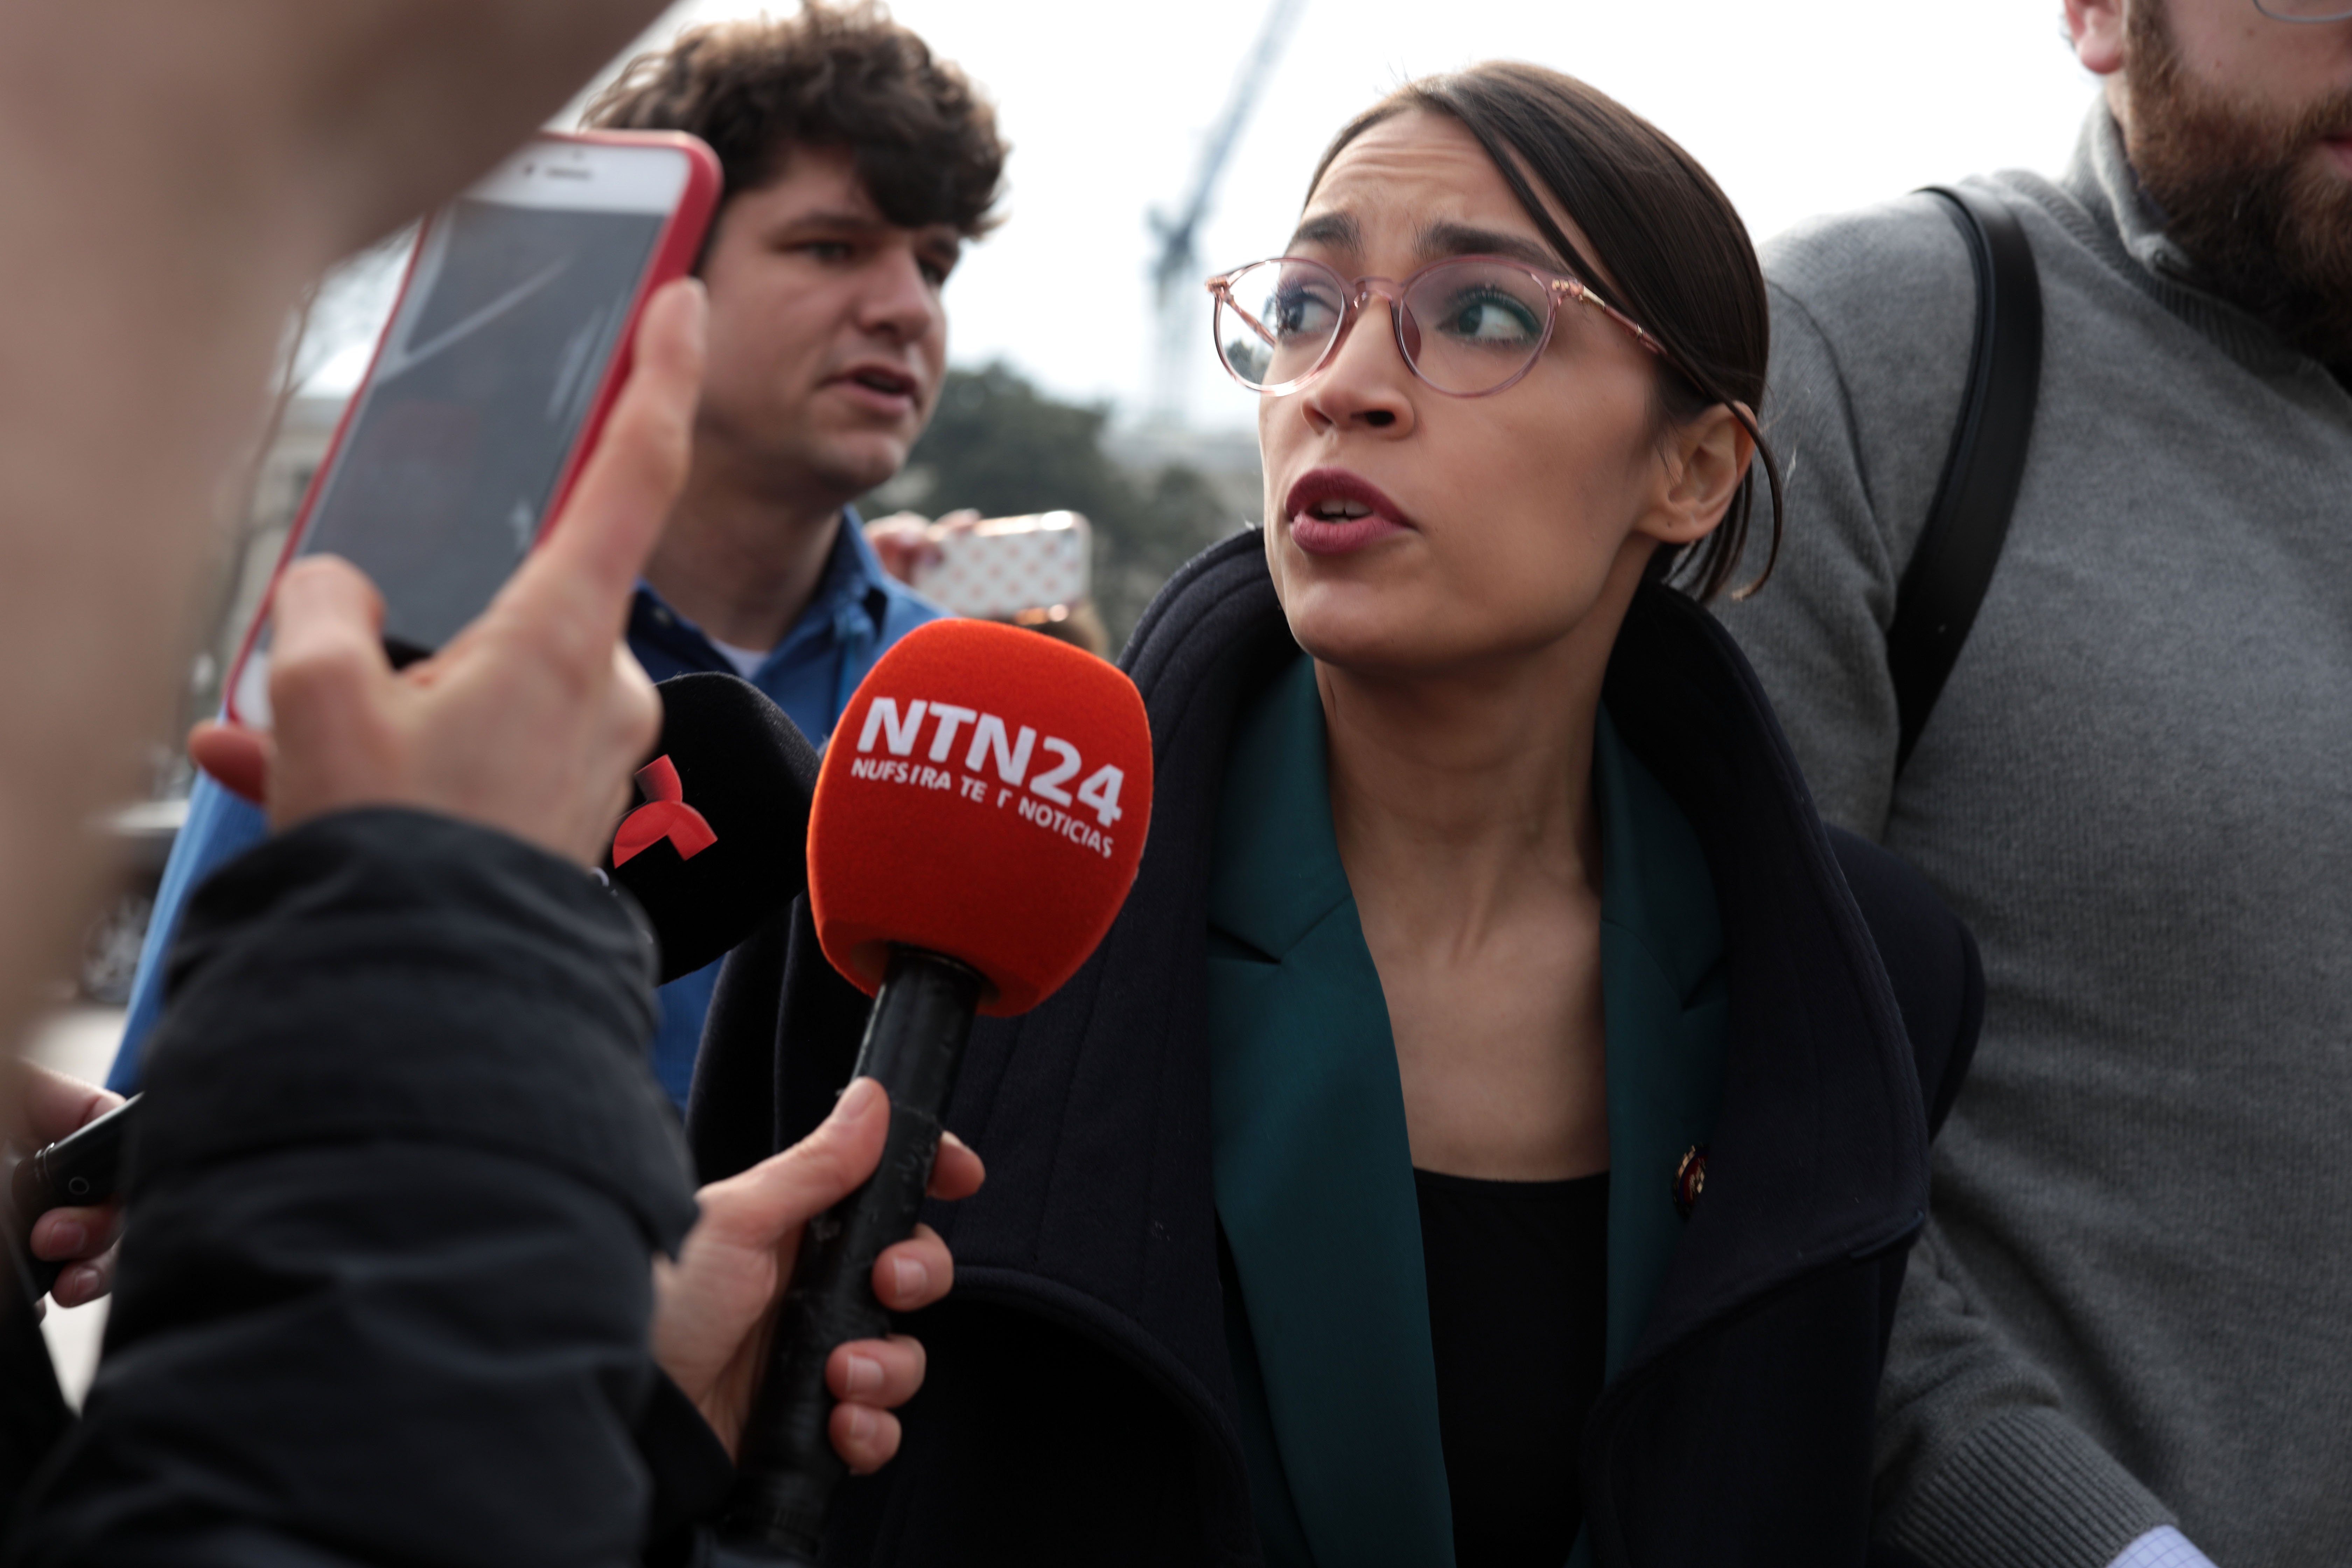 Followed by members of the media, U.S. Rep. Alexandria Ocasio-Cortez leaves a news conference at the East Front of the U.S. Capitol February 7, 2019 in Washington, DC. (Photo by Alex Wong/Getty Images)